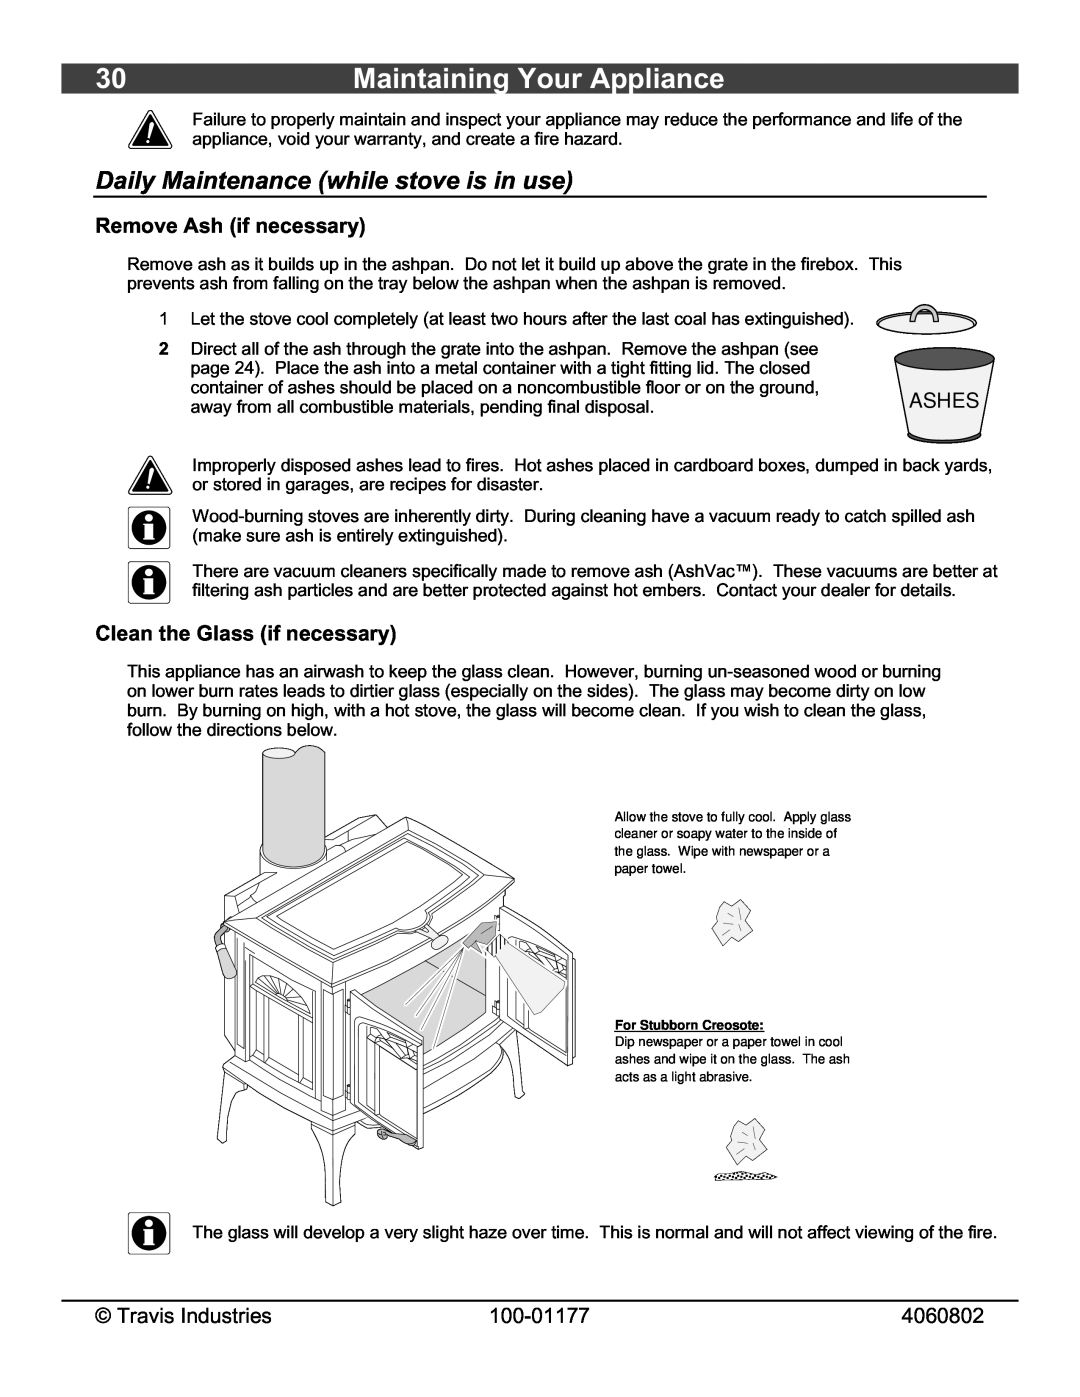 Lopi Stove owner manual Maintaining Your Appliance, Daily Maintenance while stove is in use, Remove Ash if necessary 